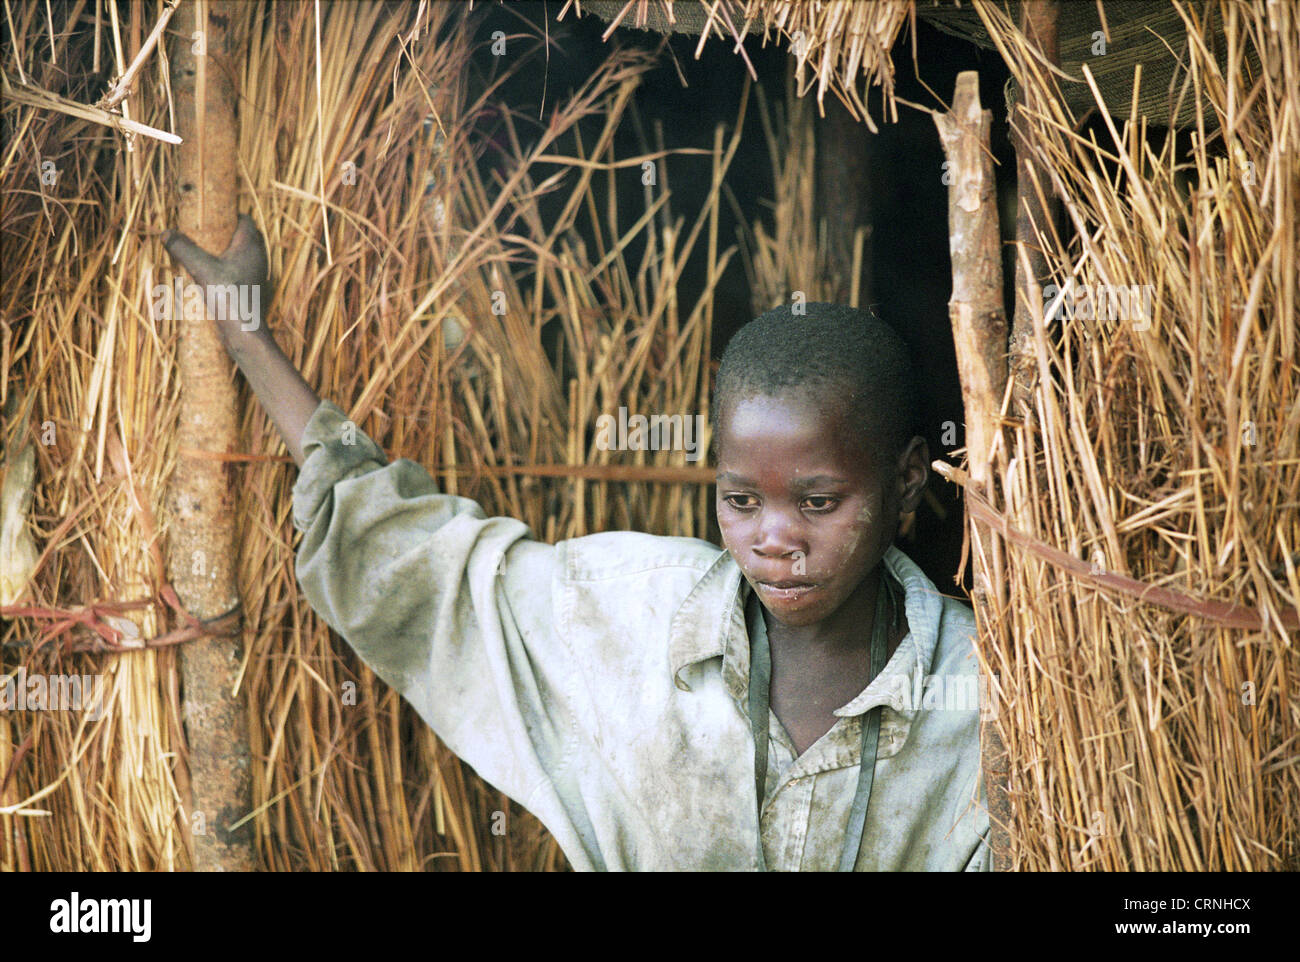 A child in the refugee camp Galangue Unita. Stock Photo